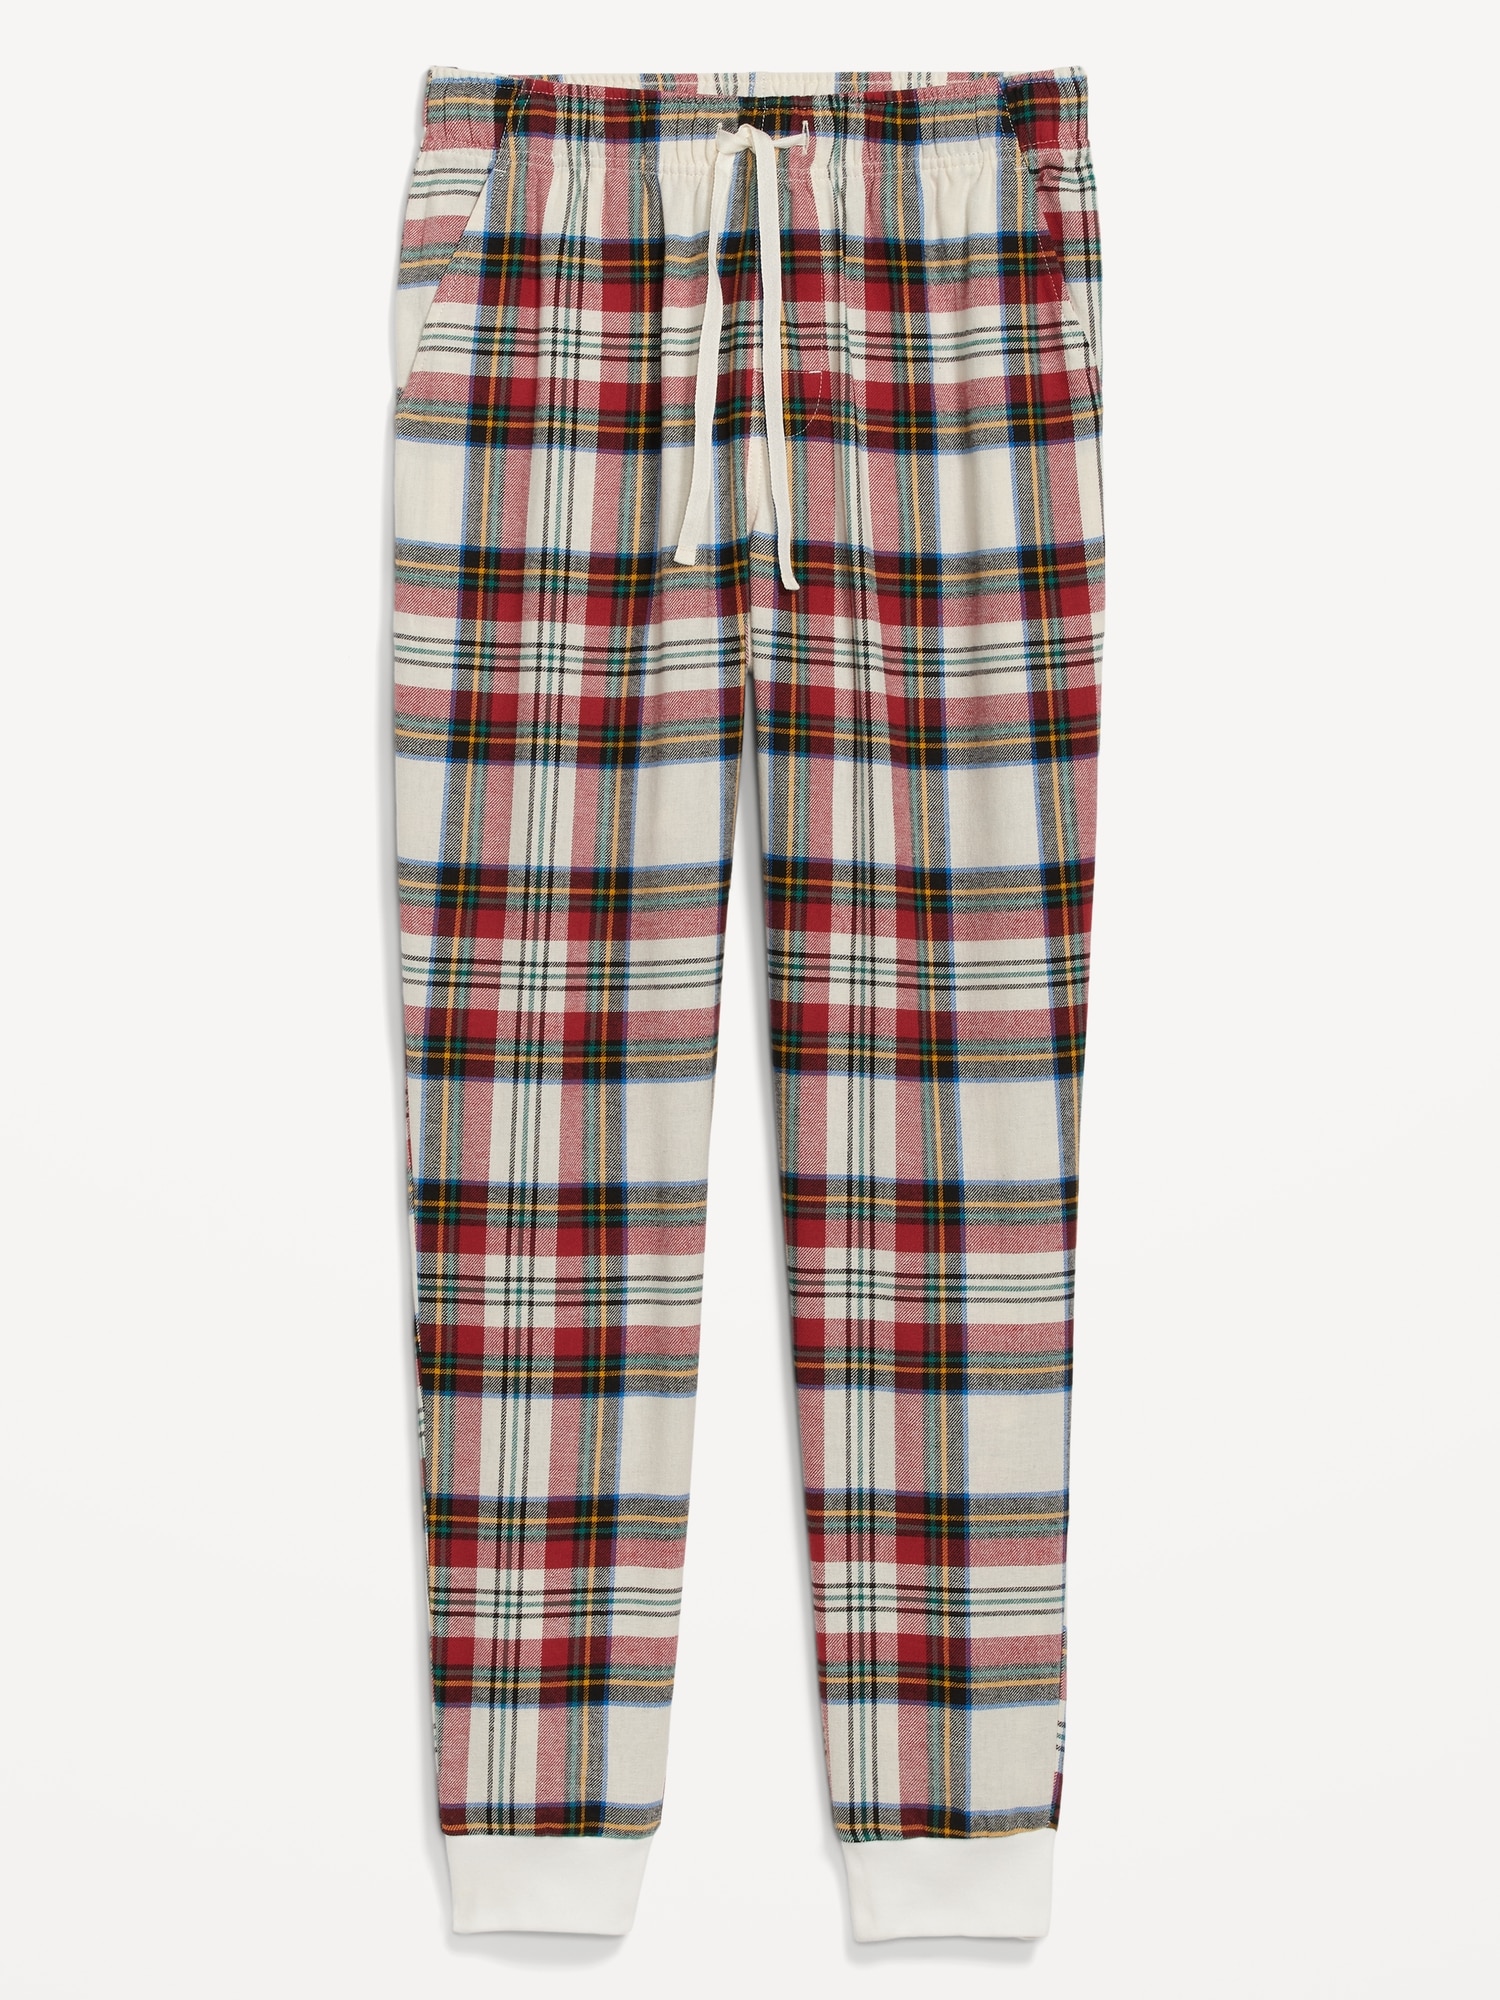 NWT Old Navy Patterned Flannel Pajama Sleep Pants Red Buffalo Plaid Women XL